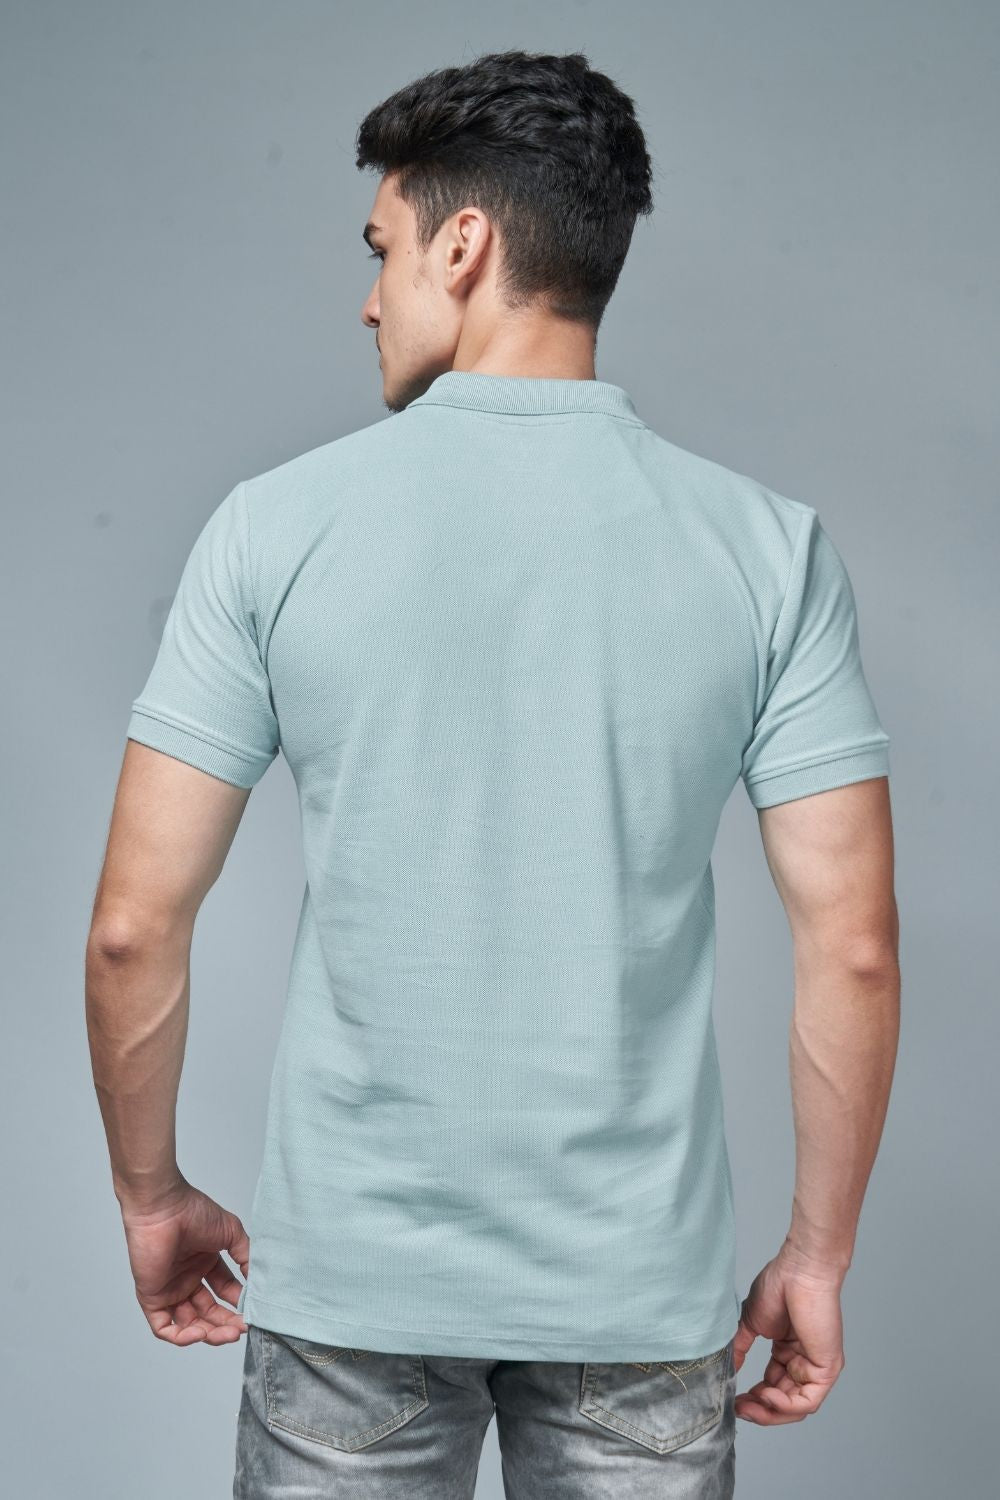 Sky light colored, identity Polo T-shirts for men with collar and half sleeves, back view.